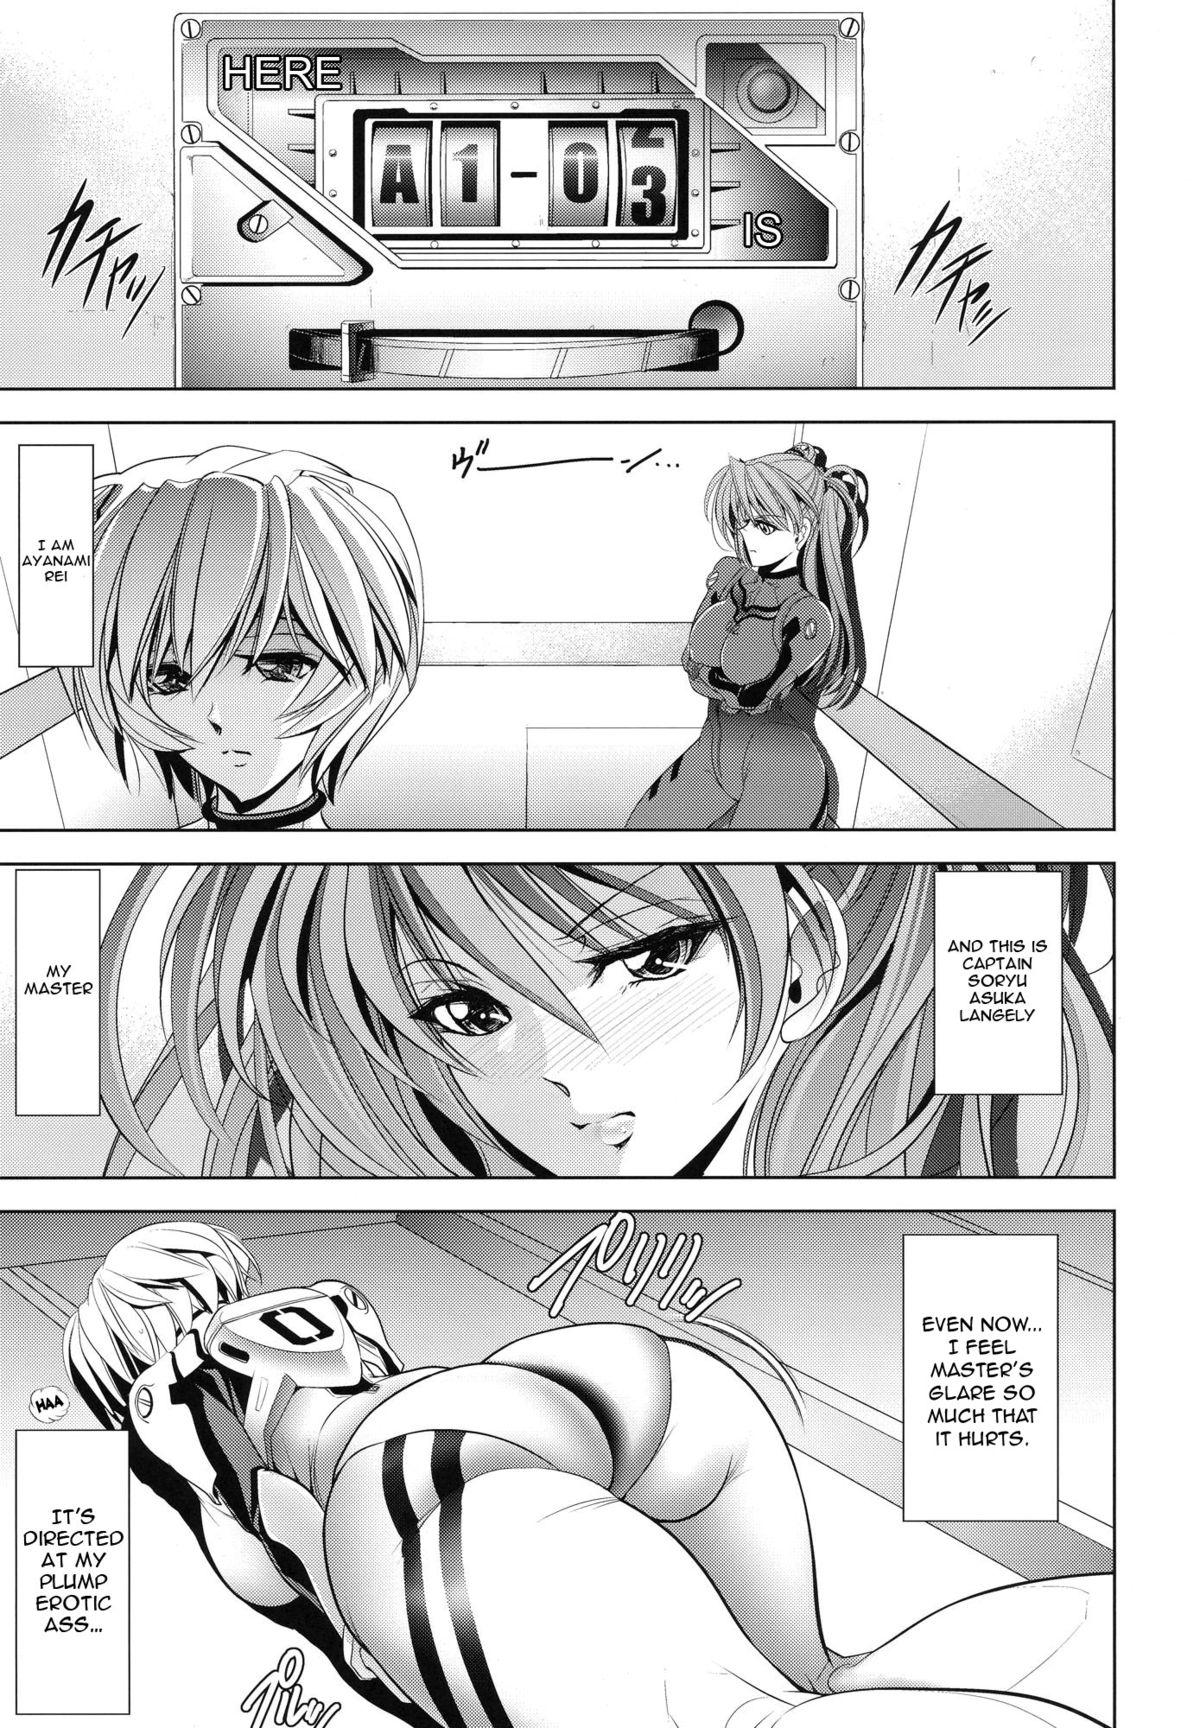 Amature Sex Tapes Princess and the Slave - Neon genesis evangelion Desperate - Page 4